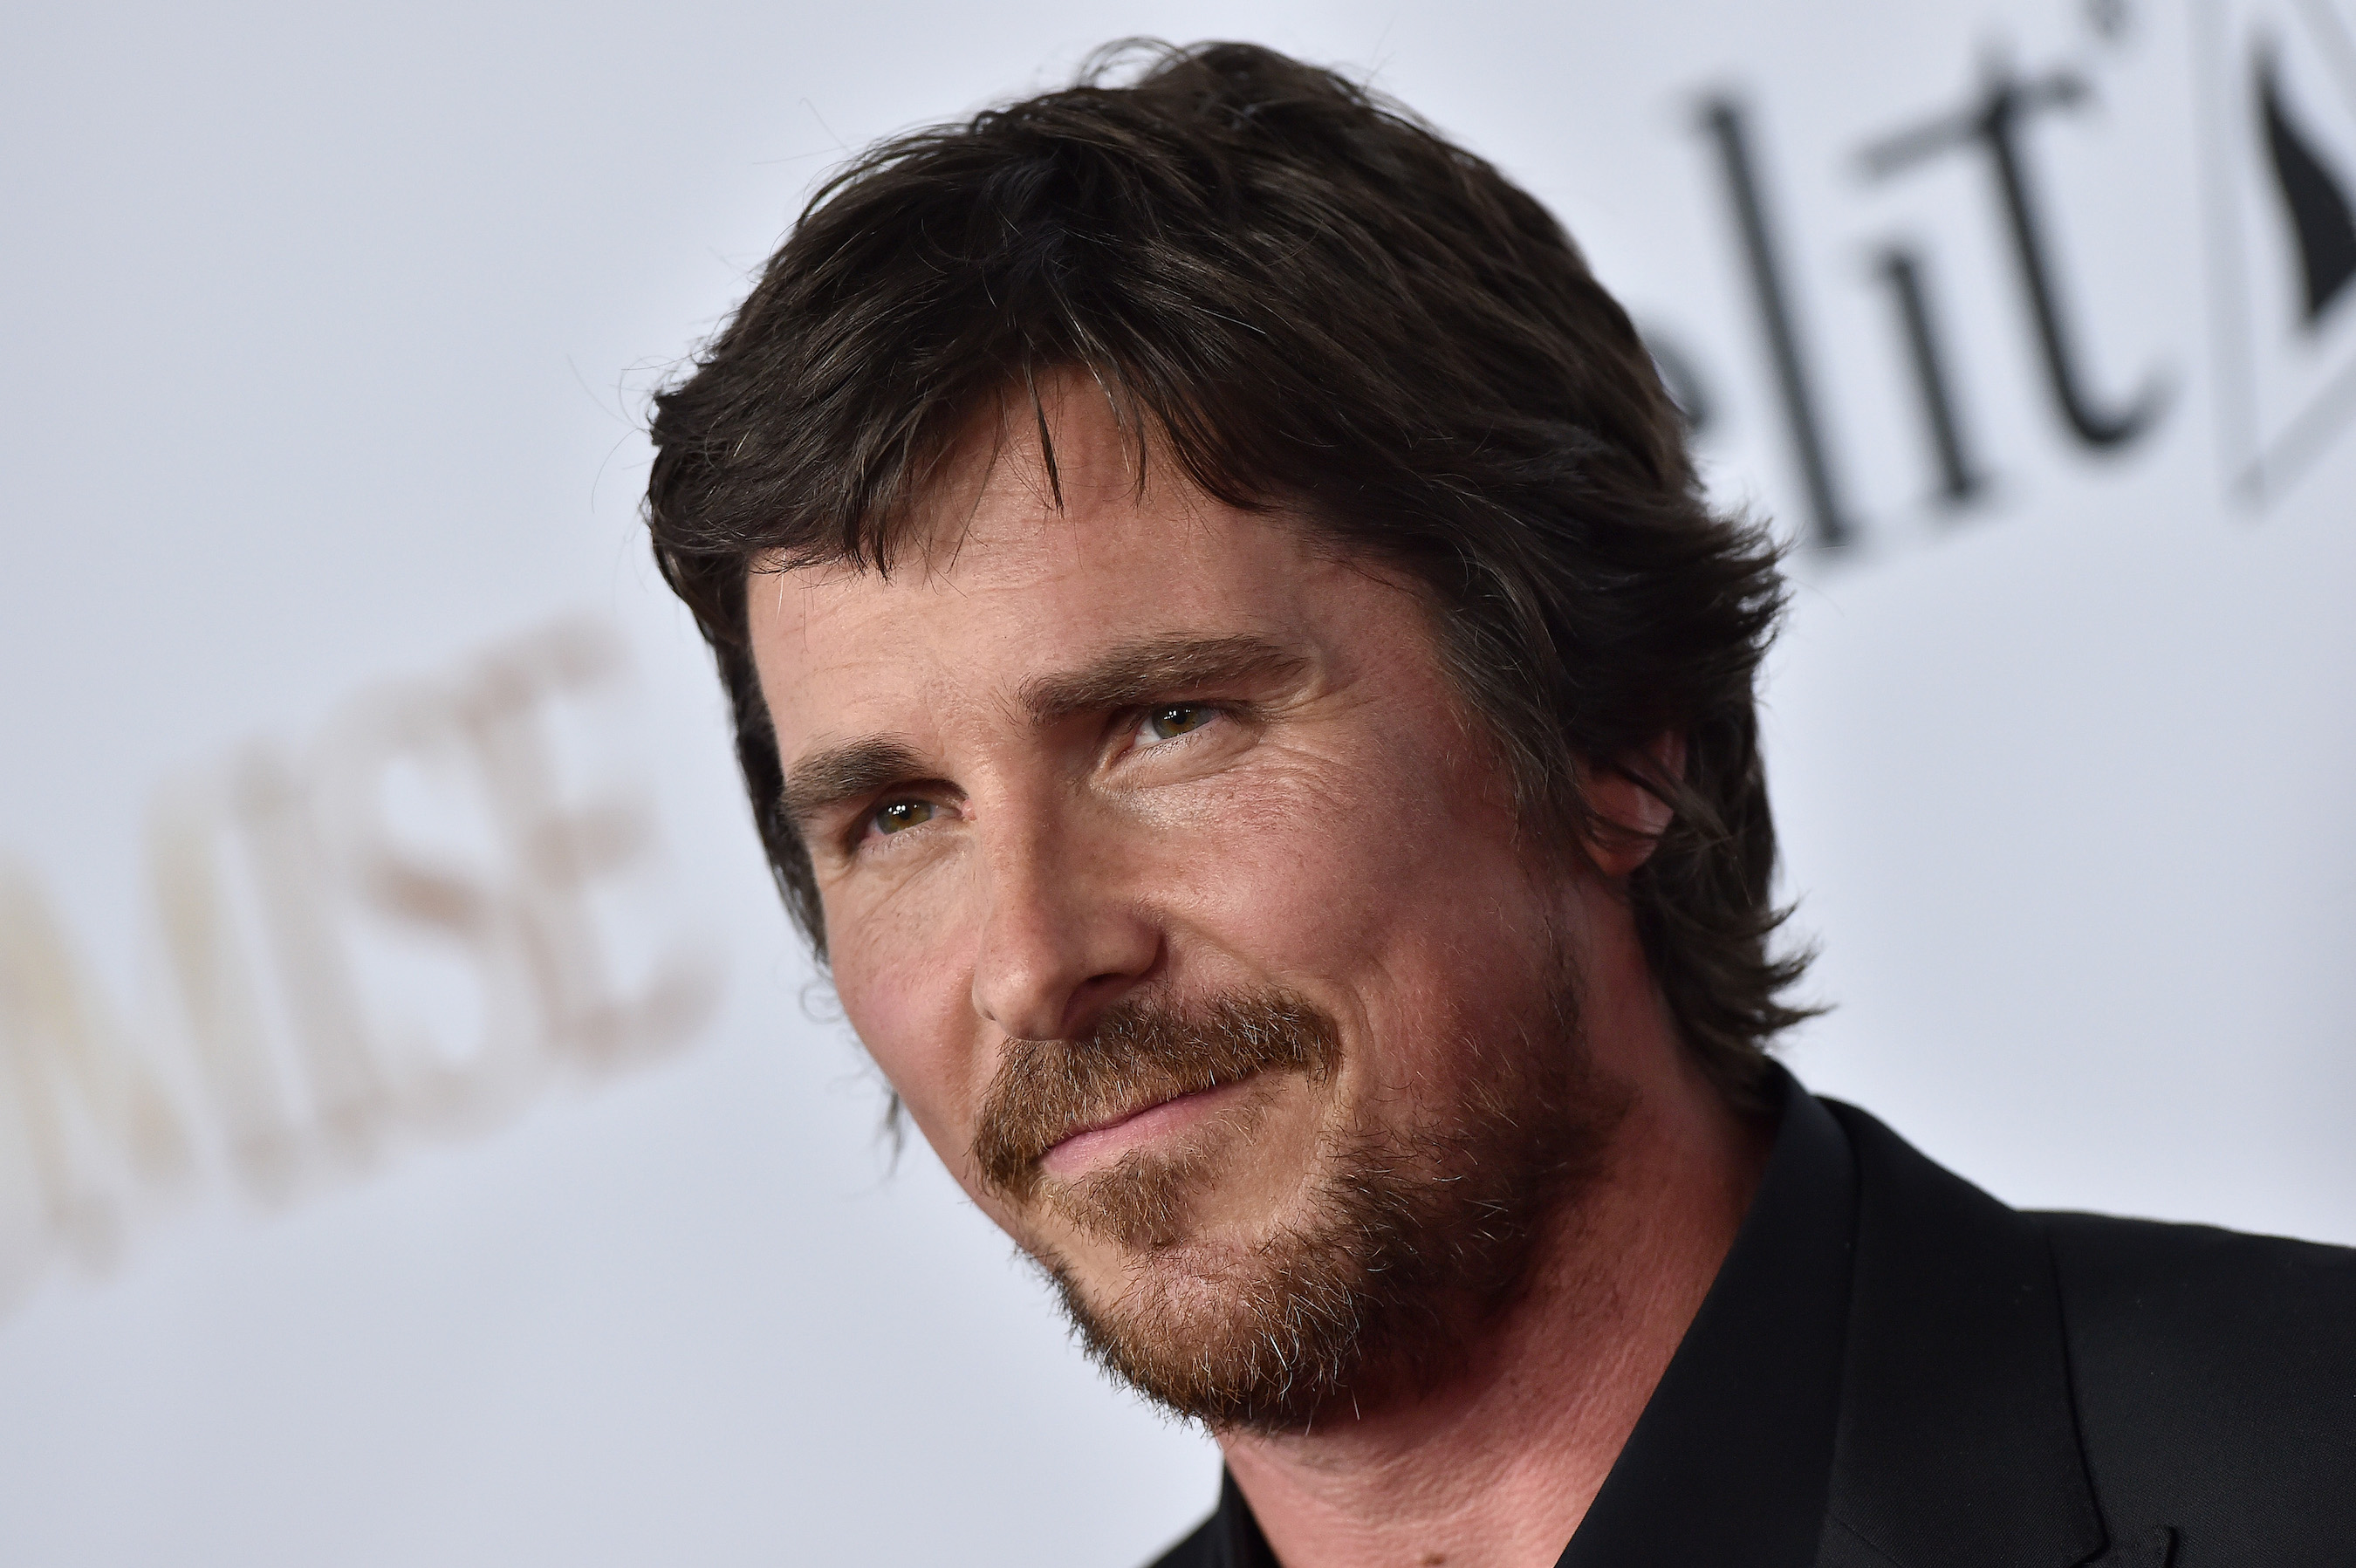 Actor Christian Bale arrives at the Premiere of Open Road Films' 'The Promise' at TCL Chinese Theatre on April 12, 2017 in Hollywood, California.  The first trailer for "Vice," in which Bale plays Dick Cheney, was recently released. (Photo by Axelle/Bauer-Griffin/FilmMagic)